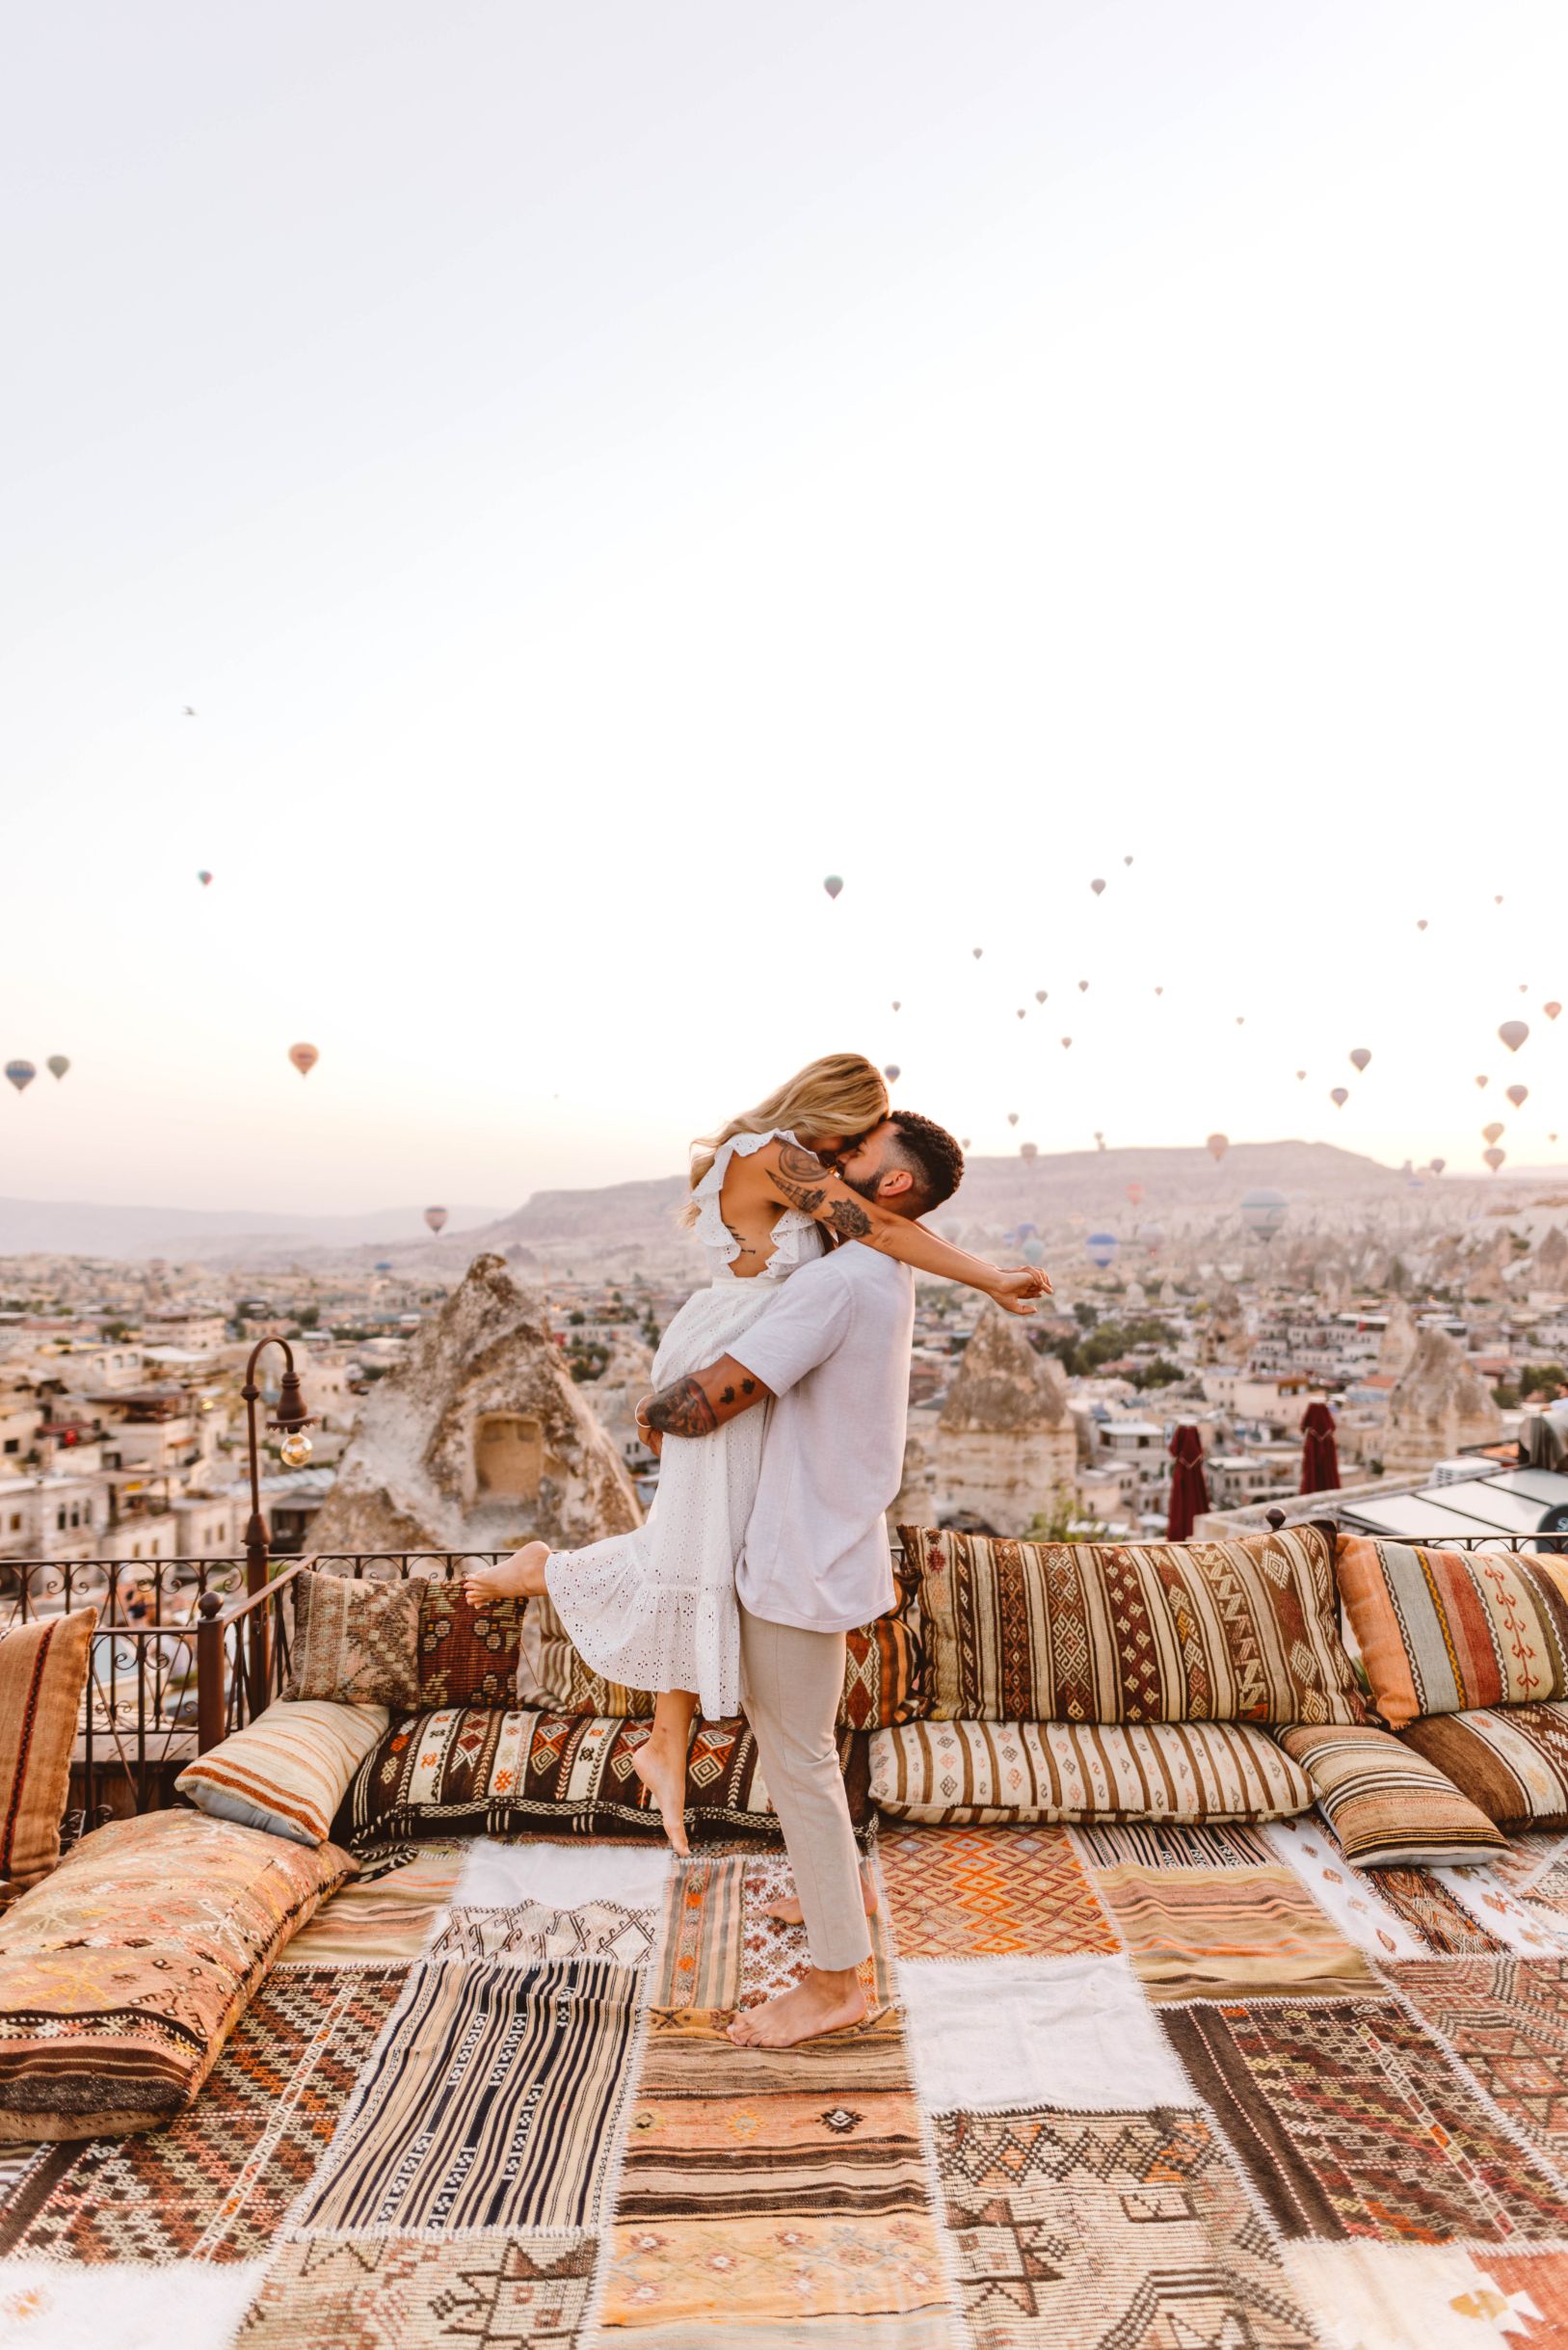 10 CAPPADOCIA CAVE HOTELS WITH THE BEST VIEWS 